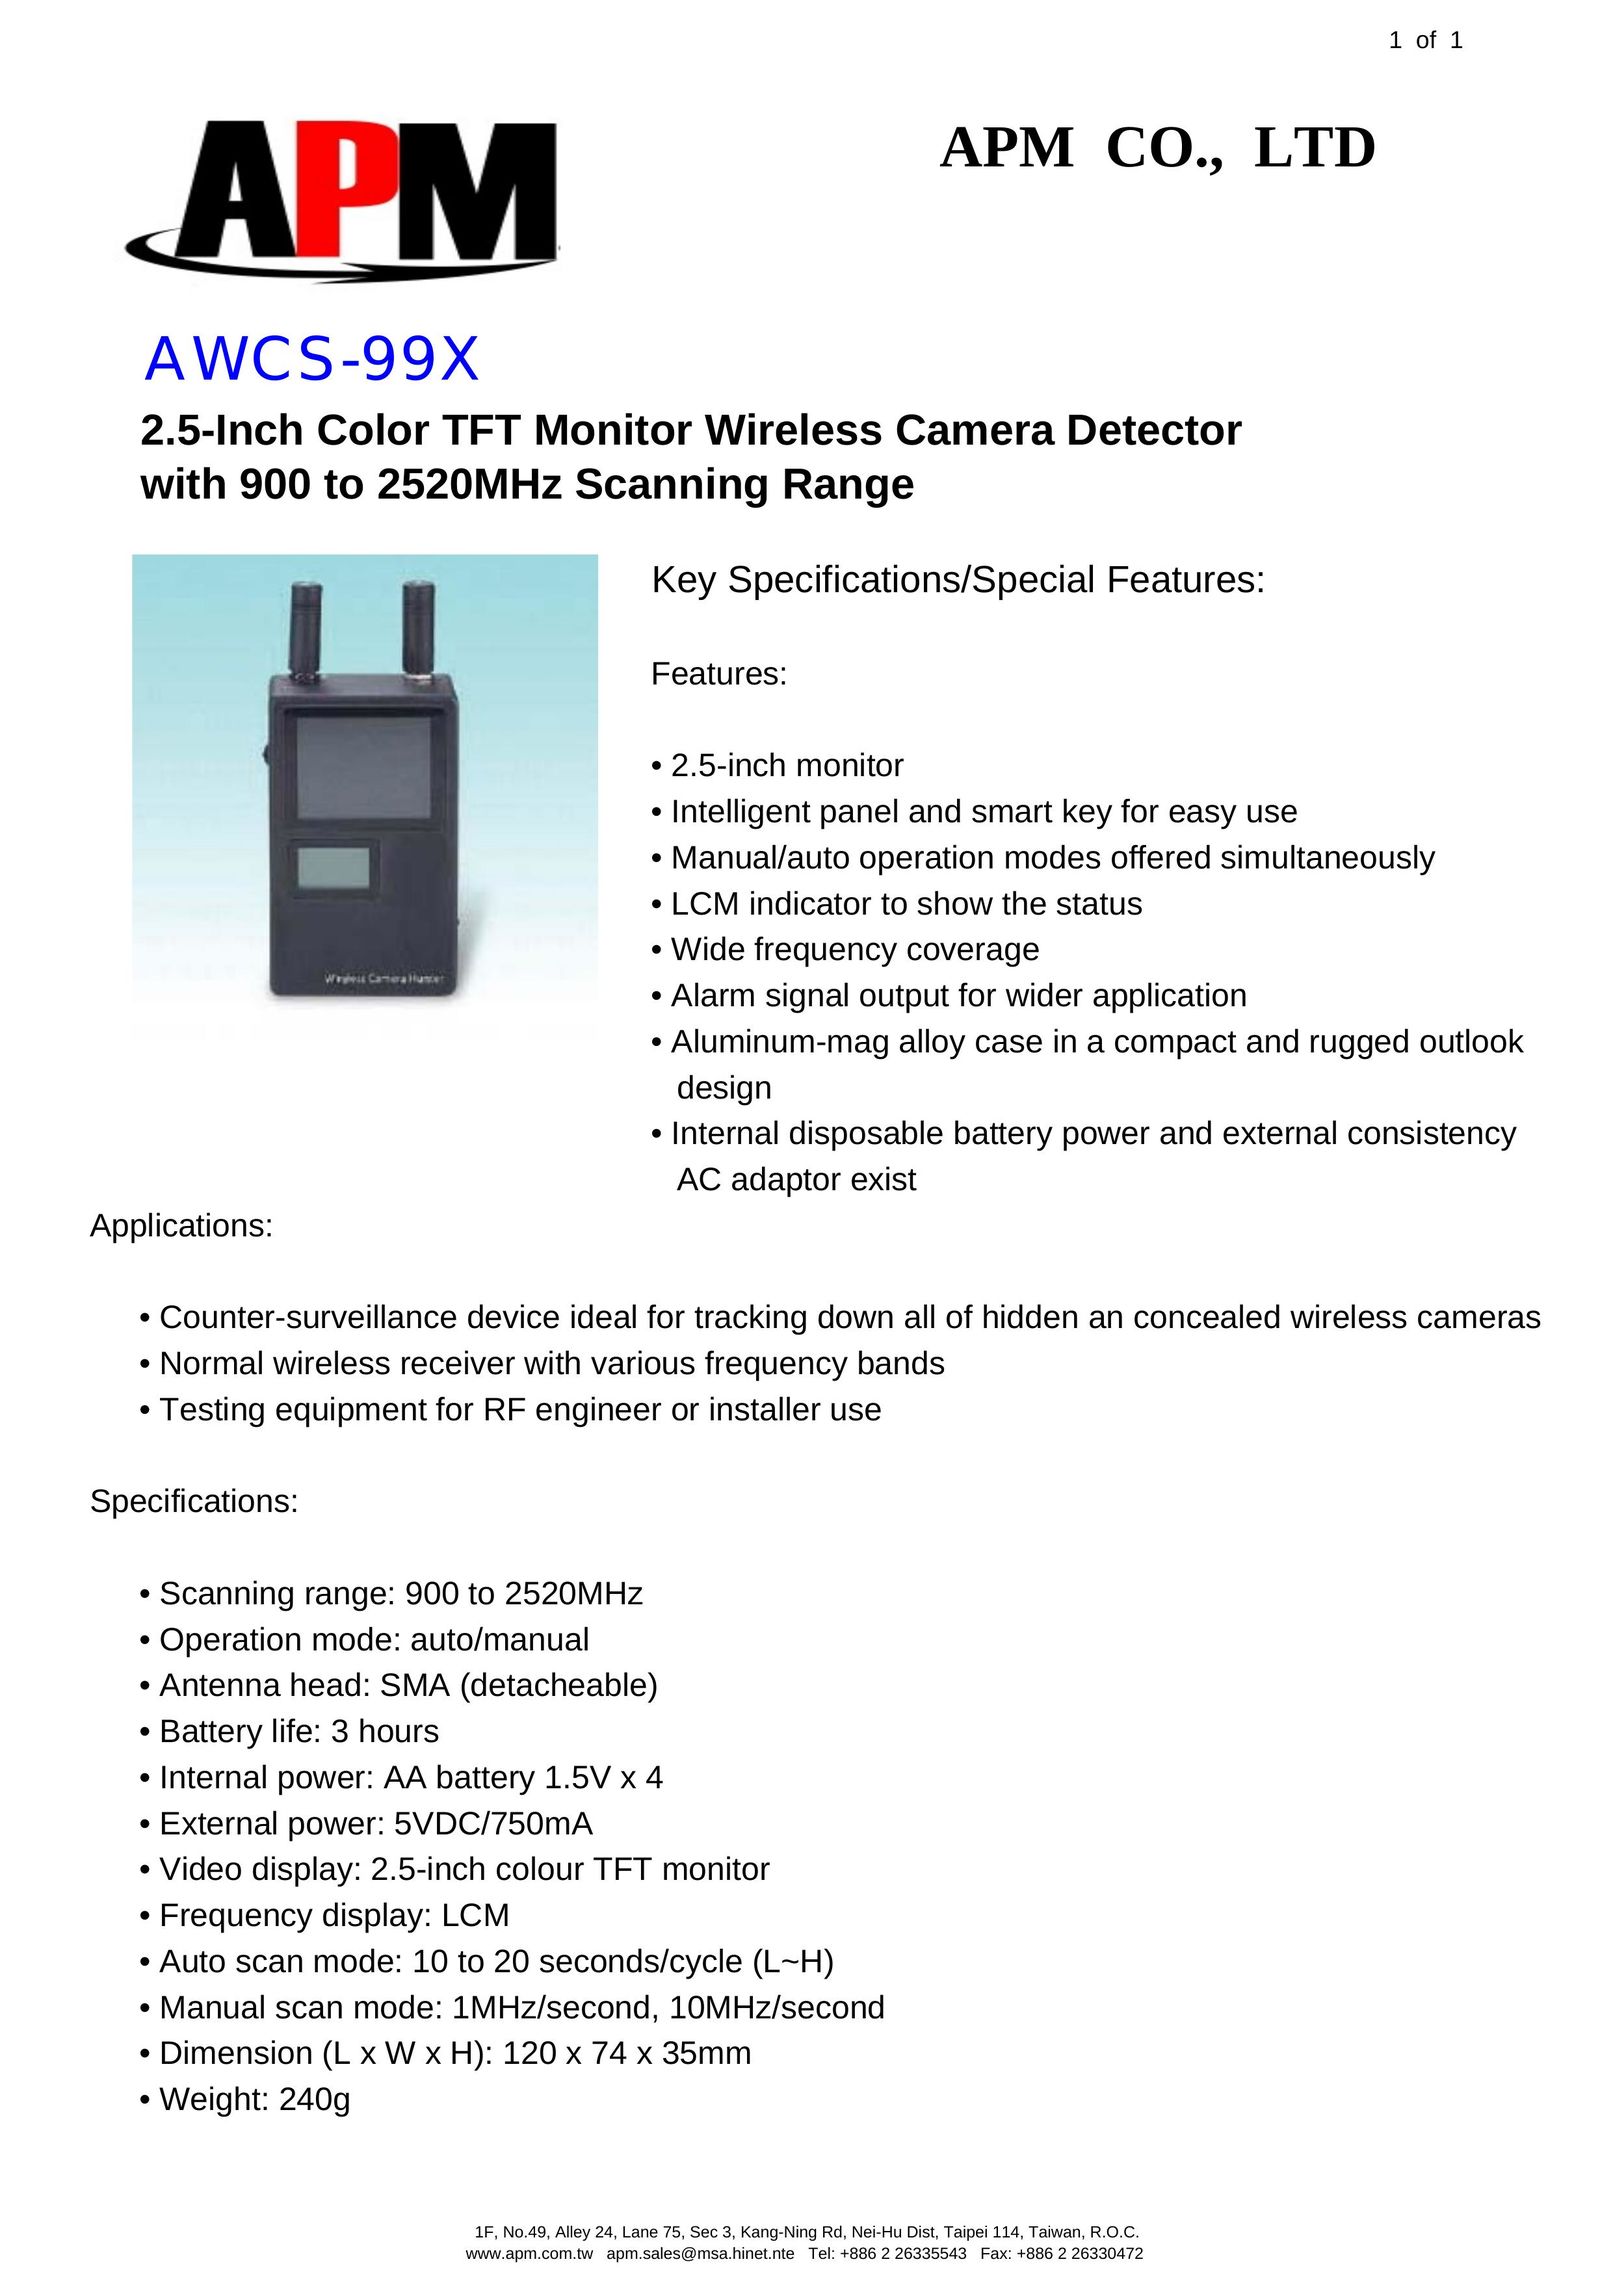 APM AWCS-99X Home Security System User Manual